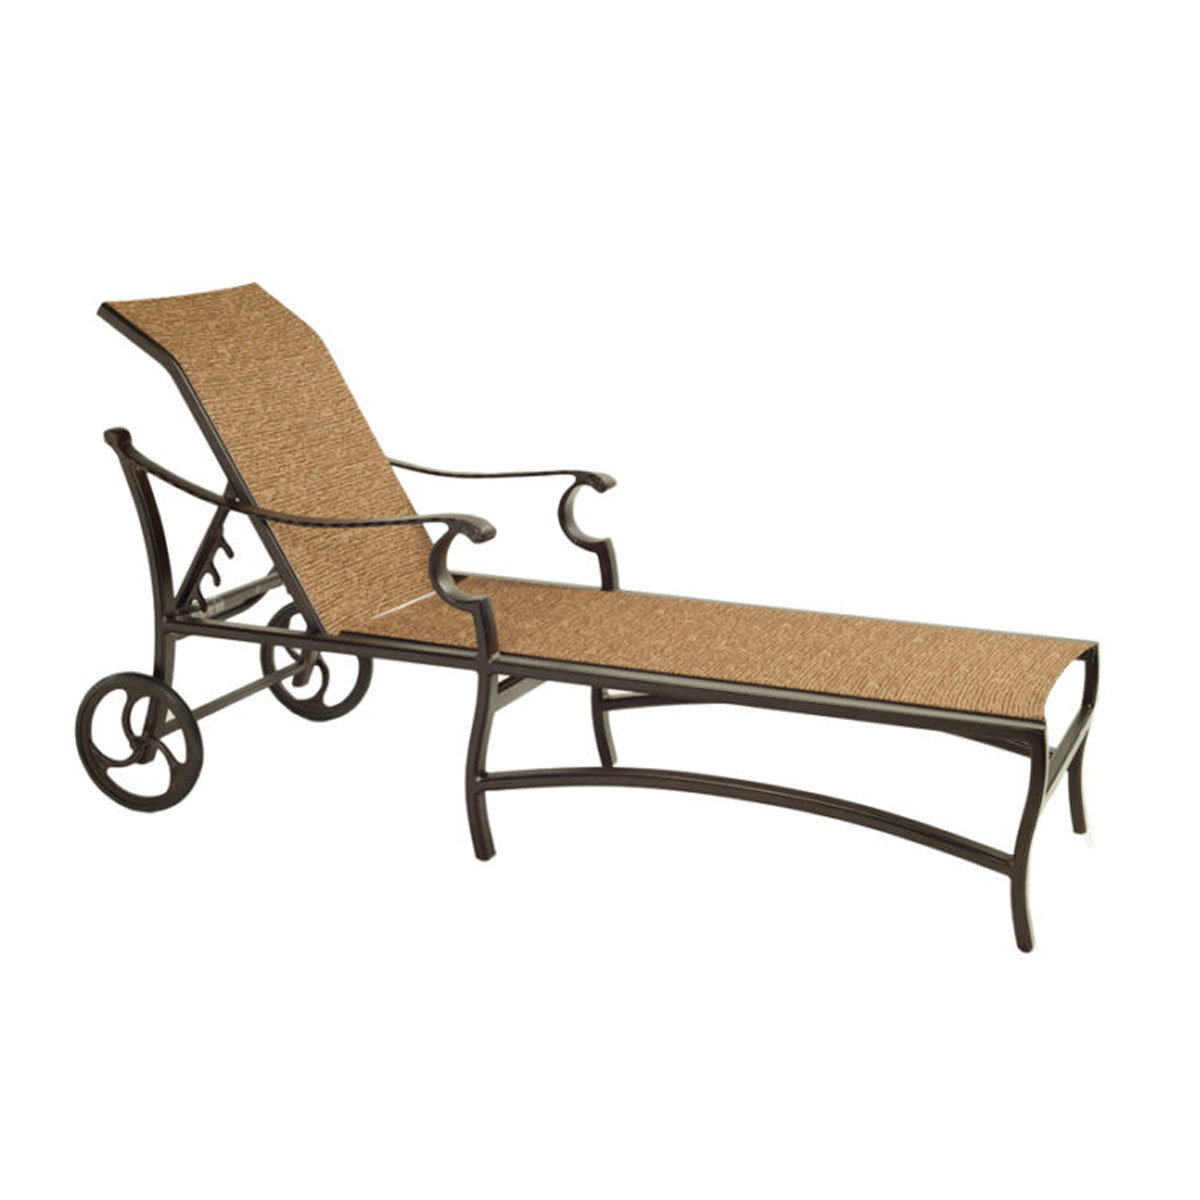 Castelle Monterey Adjustable Sling Chaise Lounge with Wheels